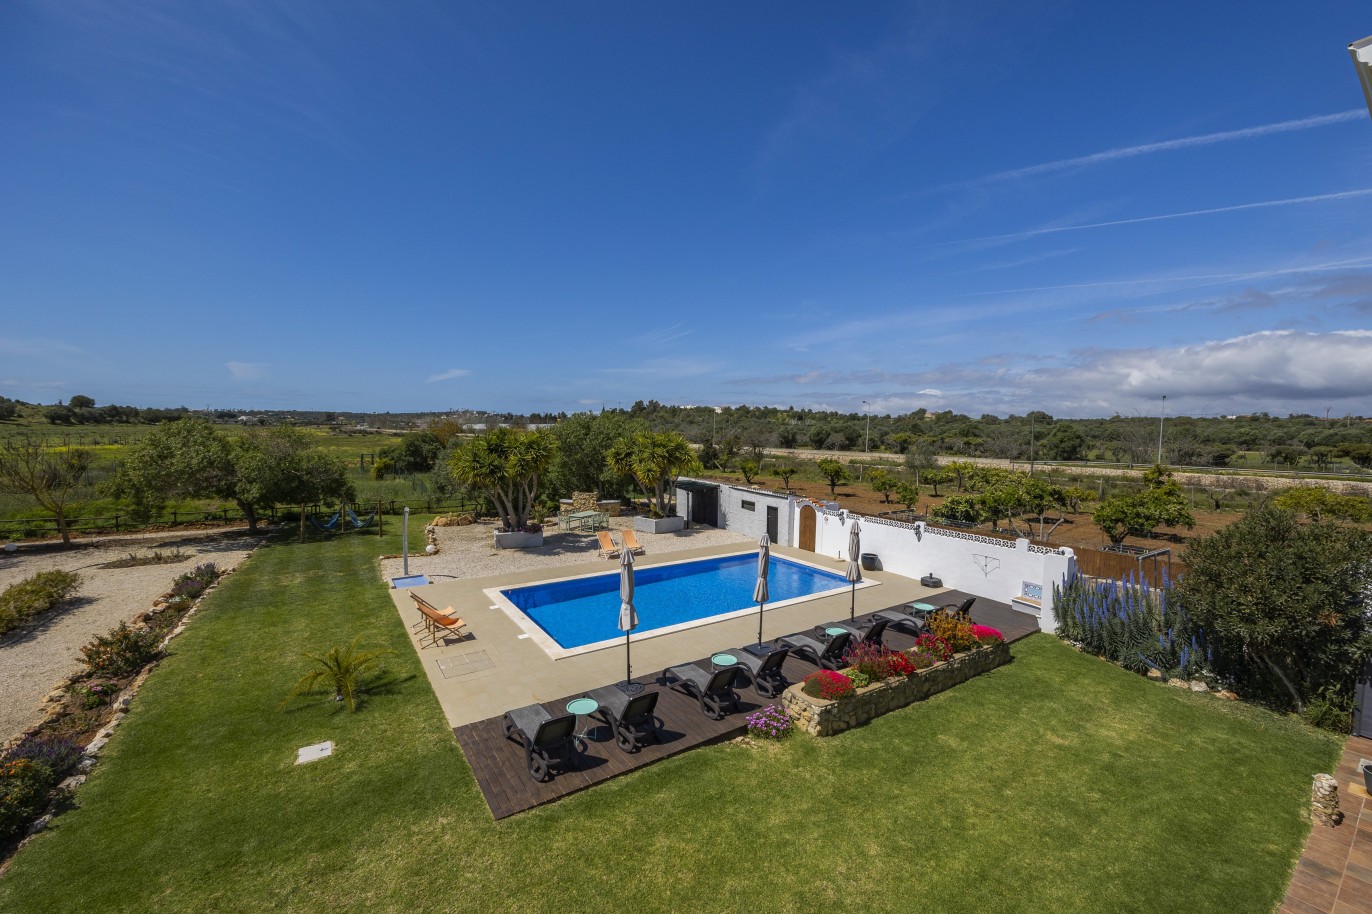 Property with 10 bedrooms for sale in Lagoa, Algarve_237262